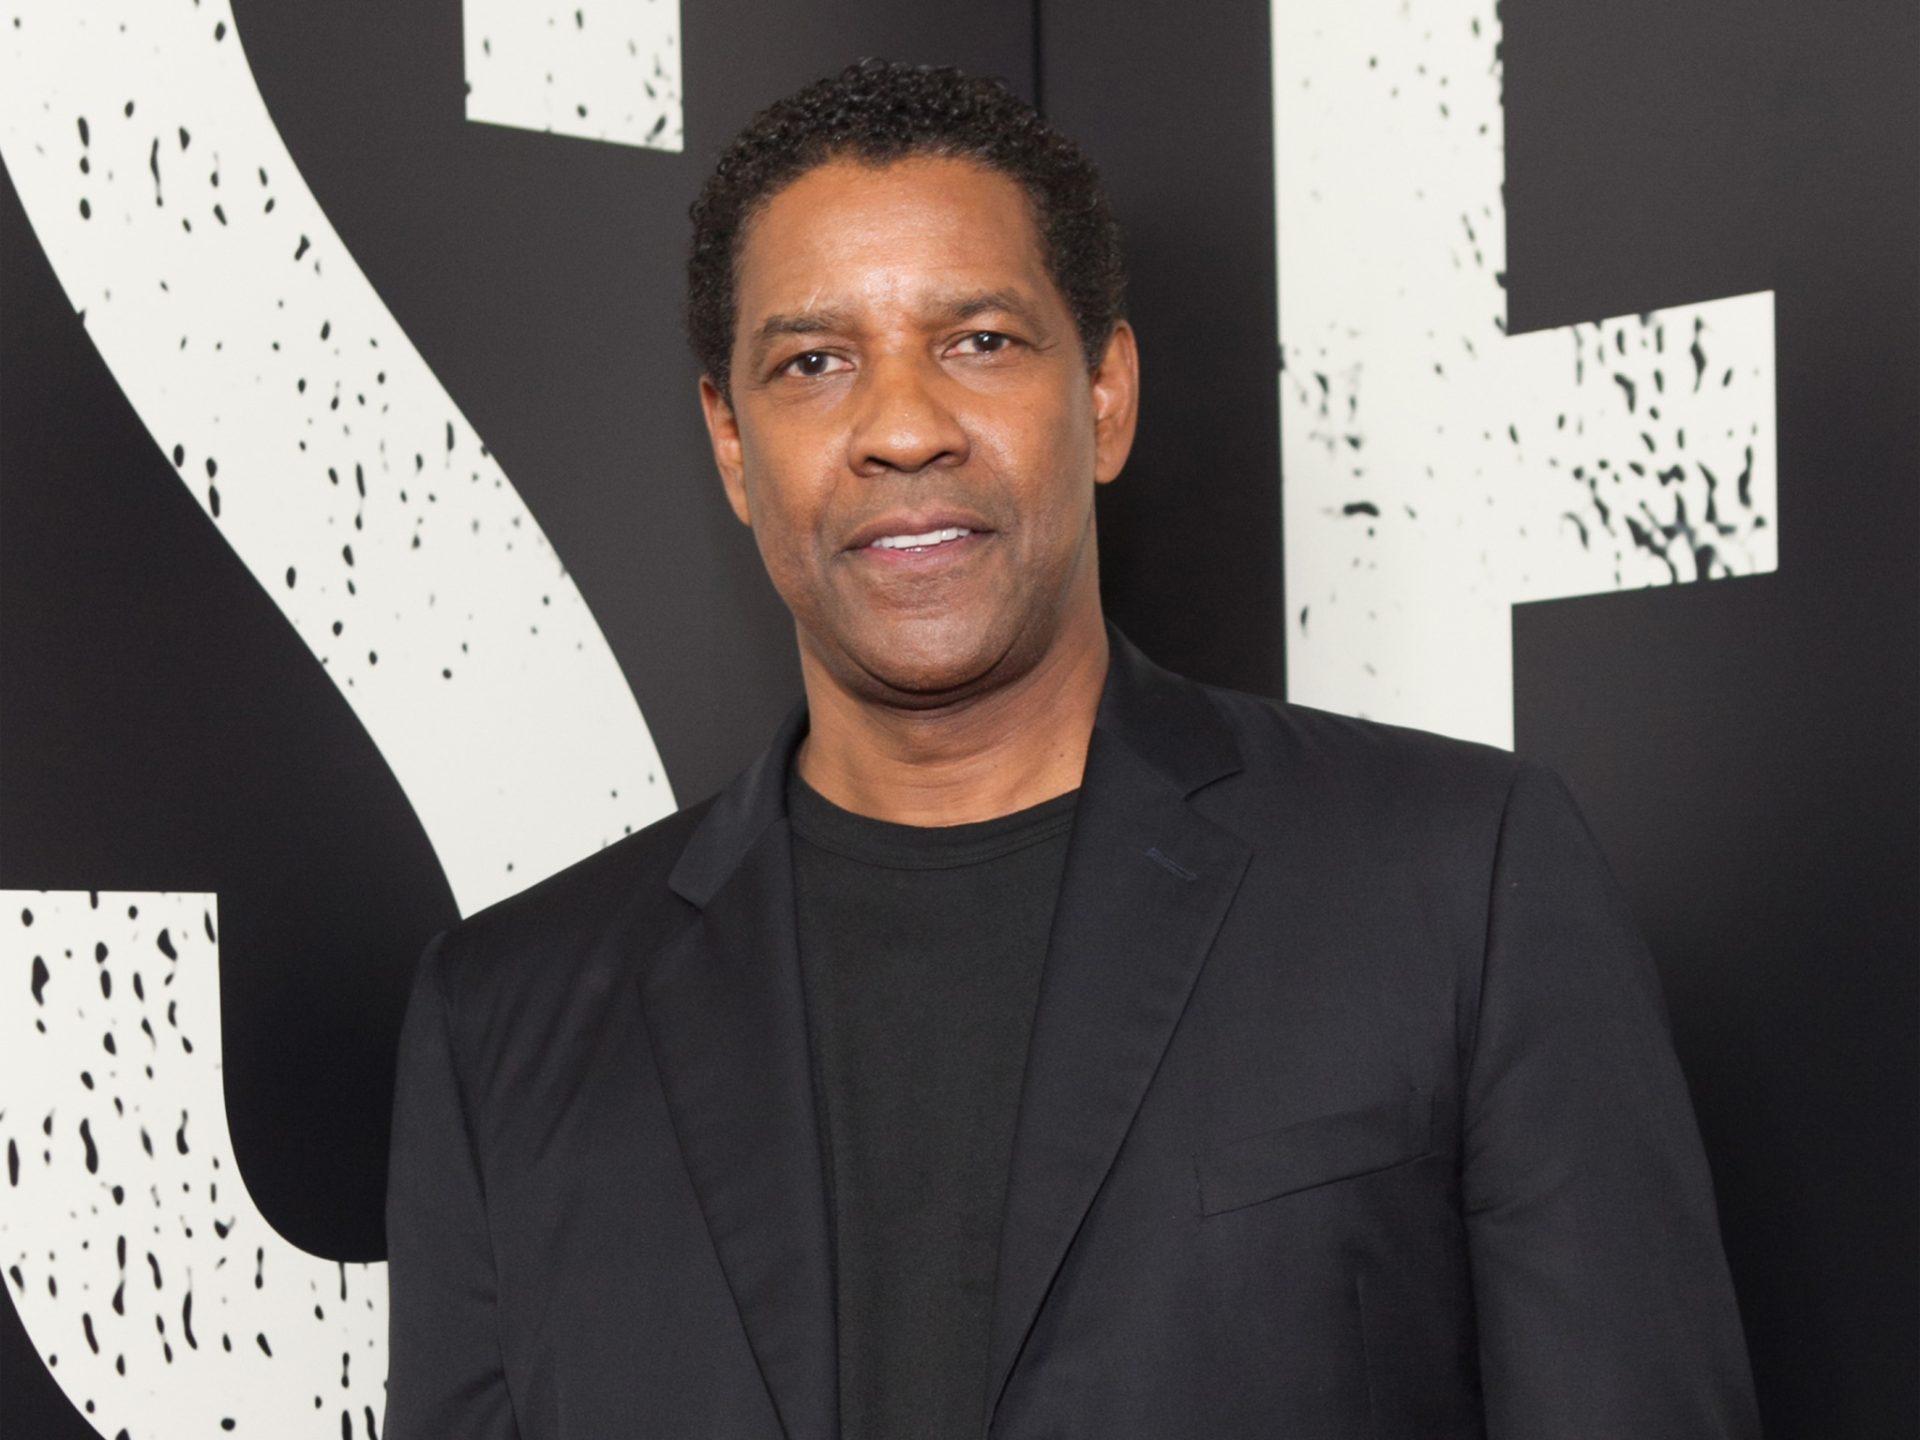 Denzel Washington might look younger in 'Equalizer' origin story due to AI